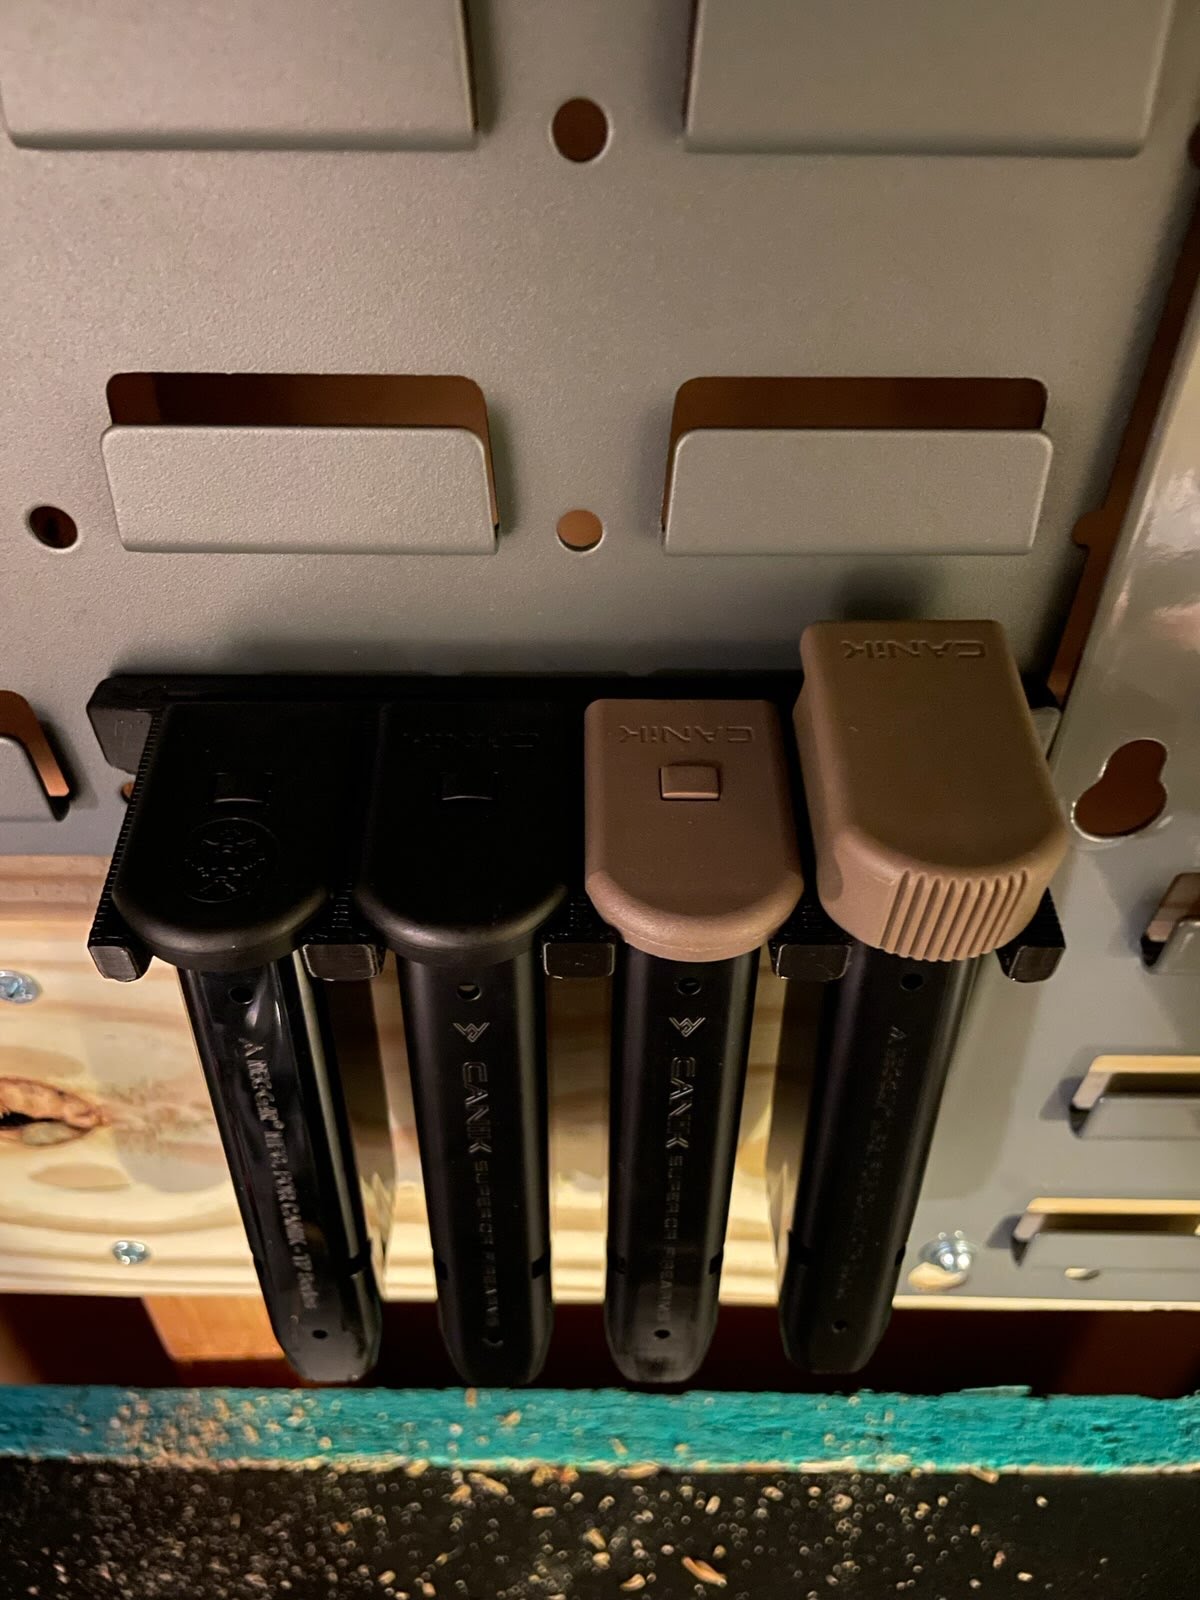 Mount for Canik TP9 / METE / Rival Mags - Command Strips | Magazine Holder Storage Rack